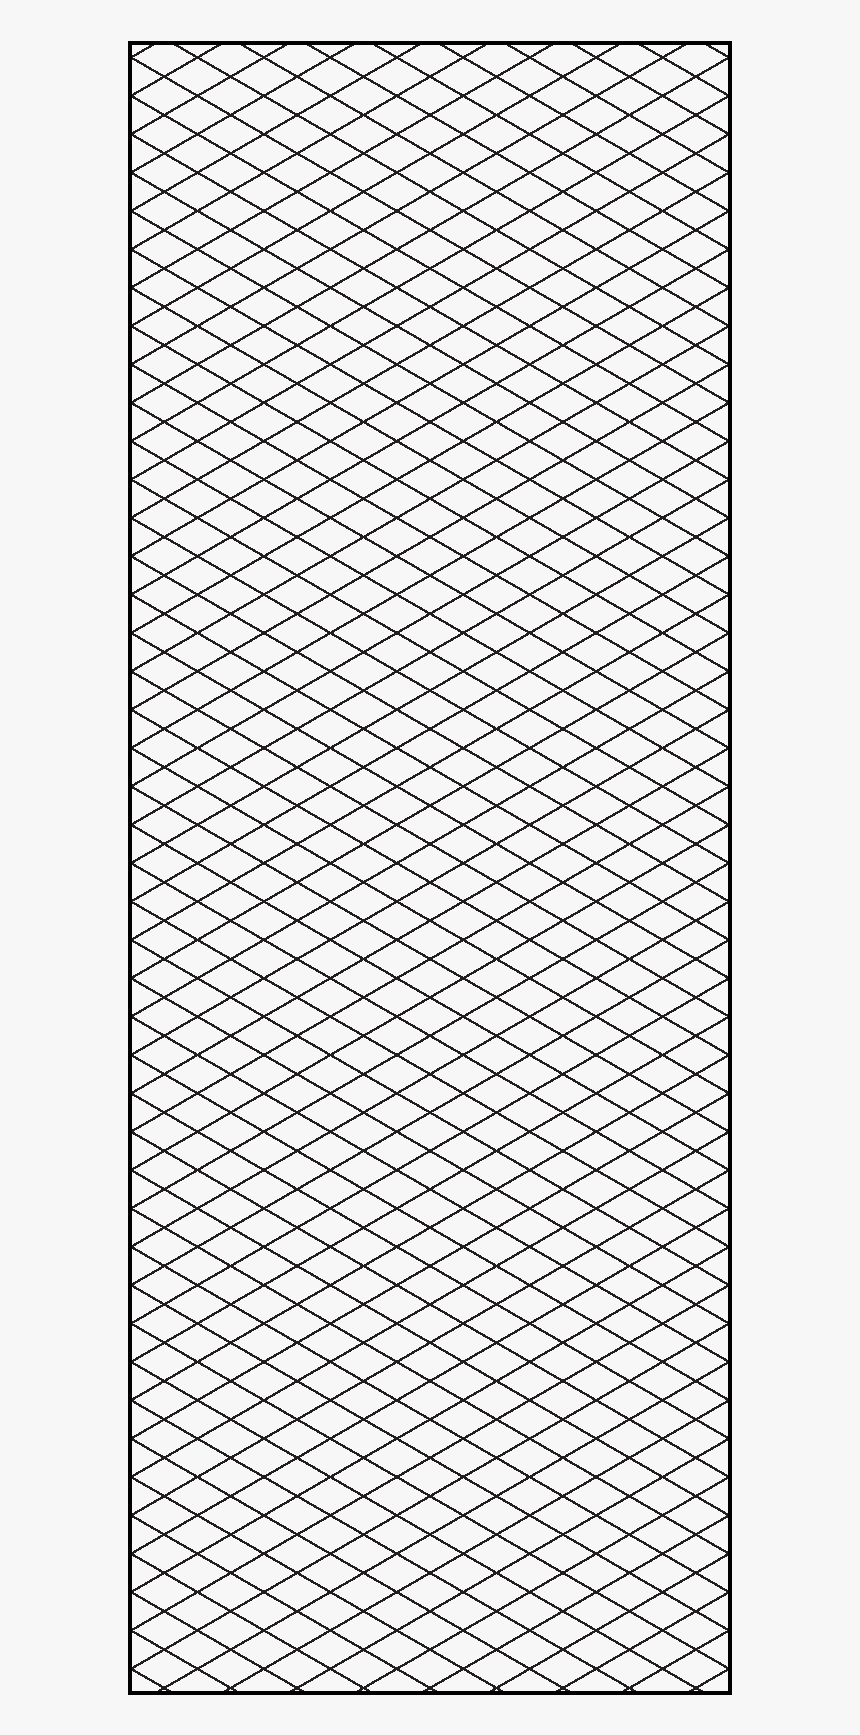 Isometric Grid - Black-and-white, HD Png Download, Free Download